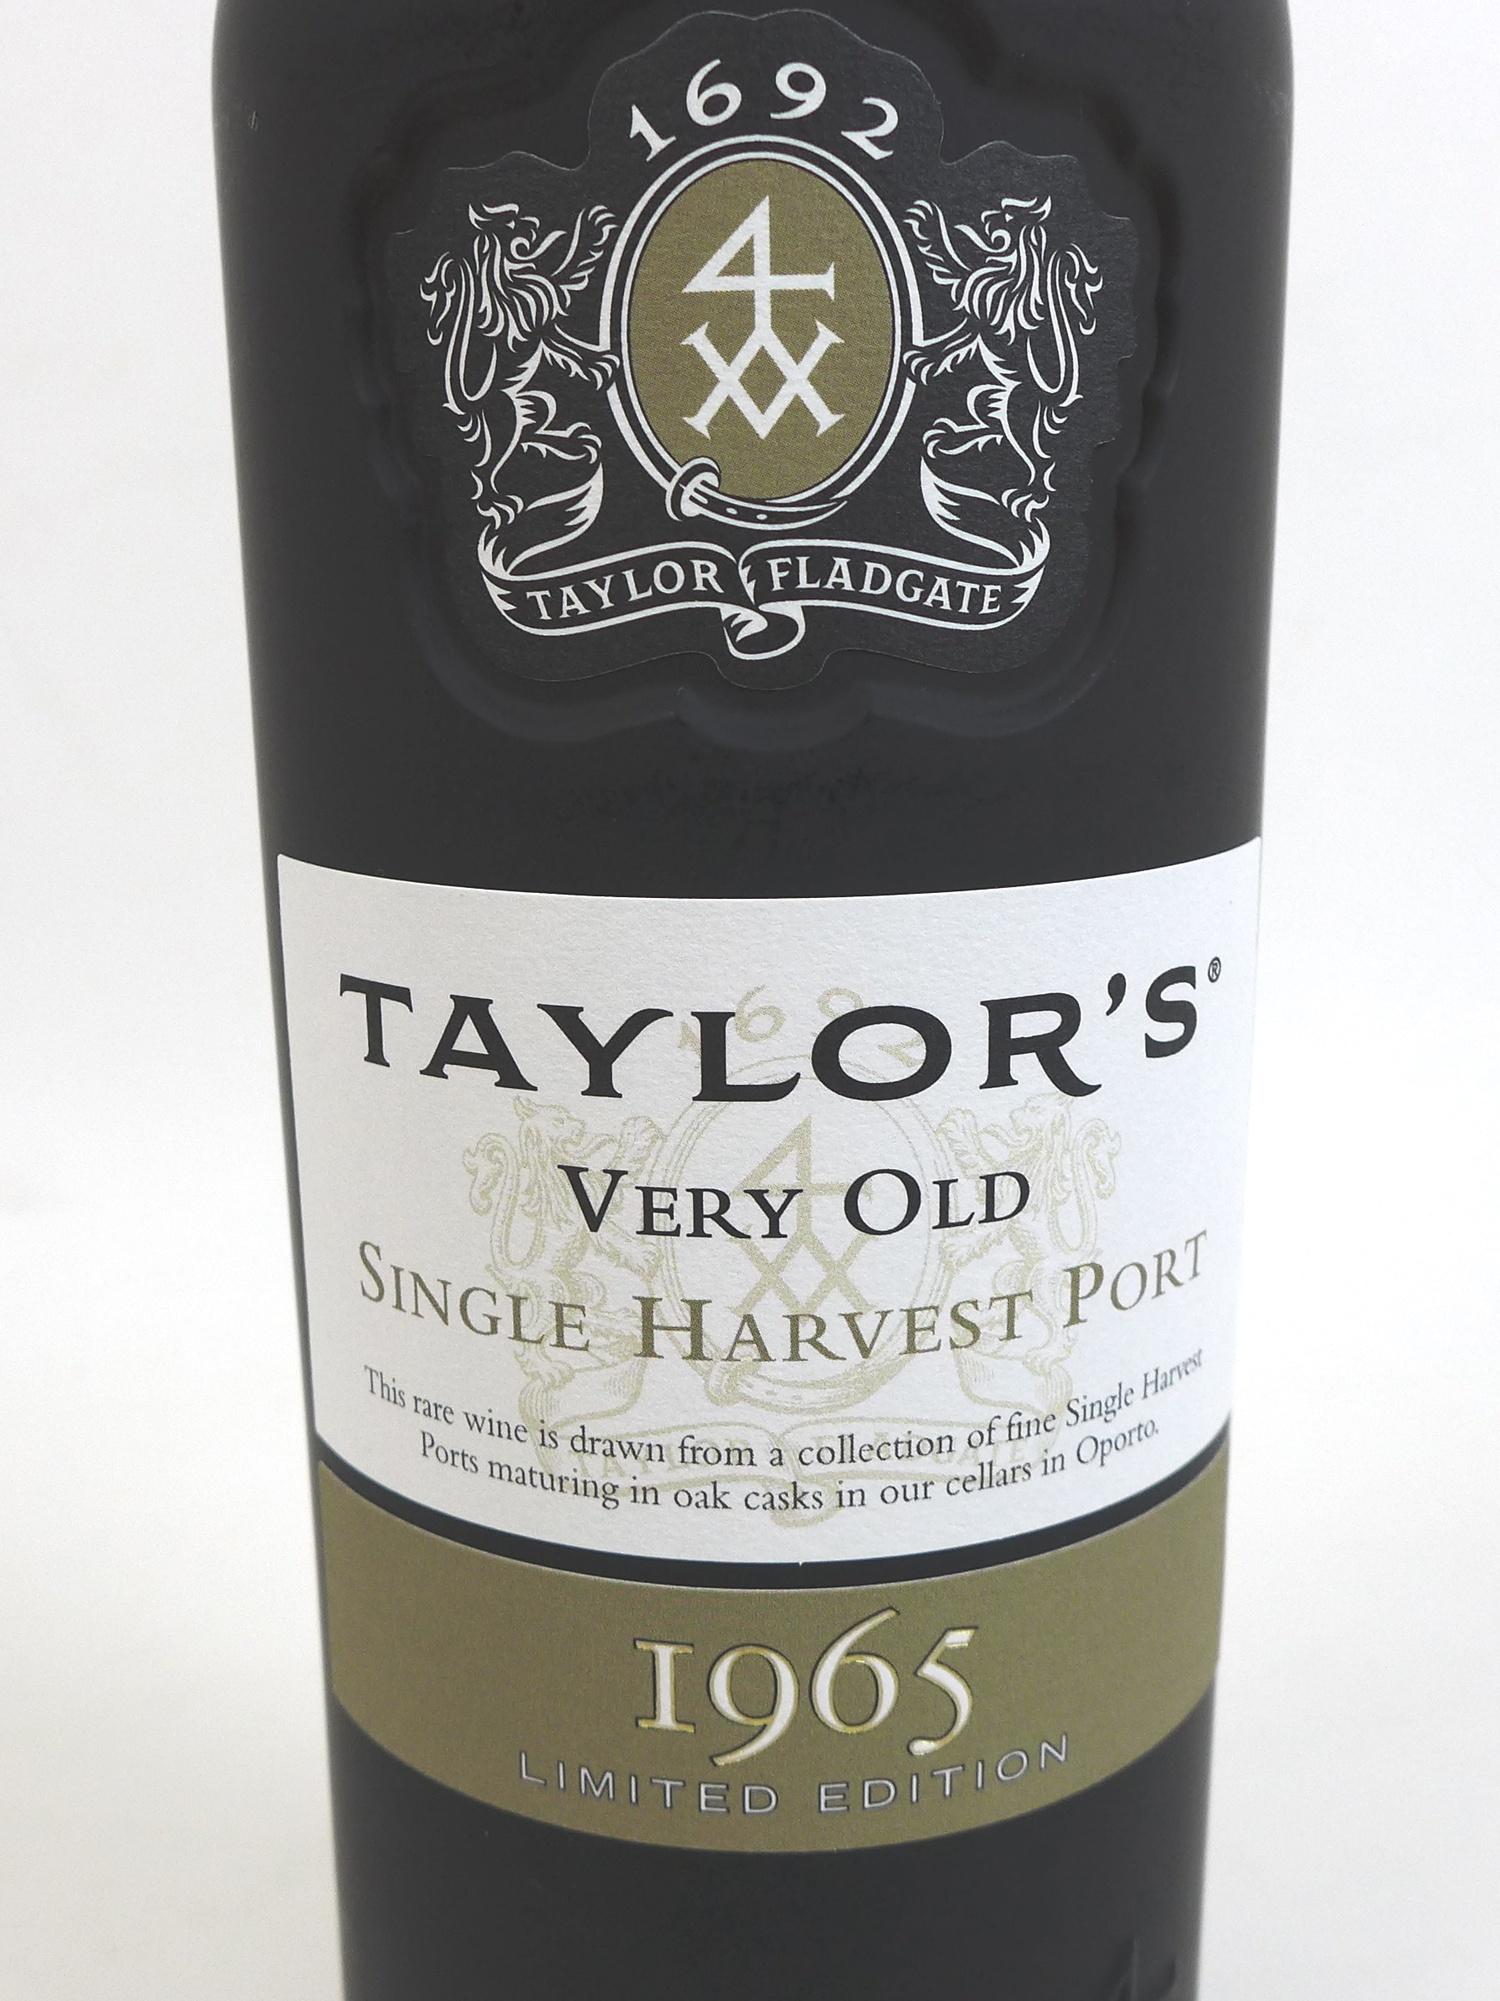 A limited edition bottle of Taylor's 'Very Old Single Harvest 1965' port, with wooden presentation - Image 2 of 5